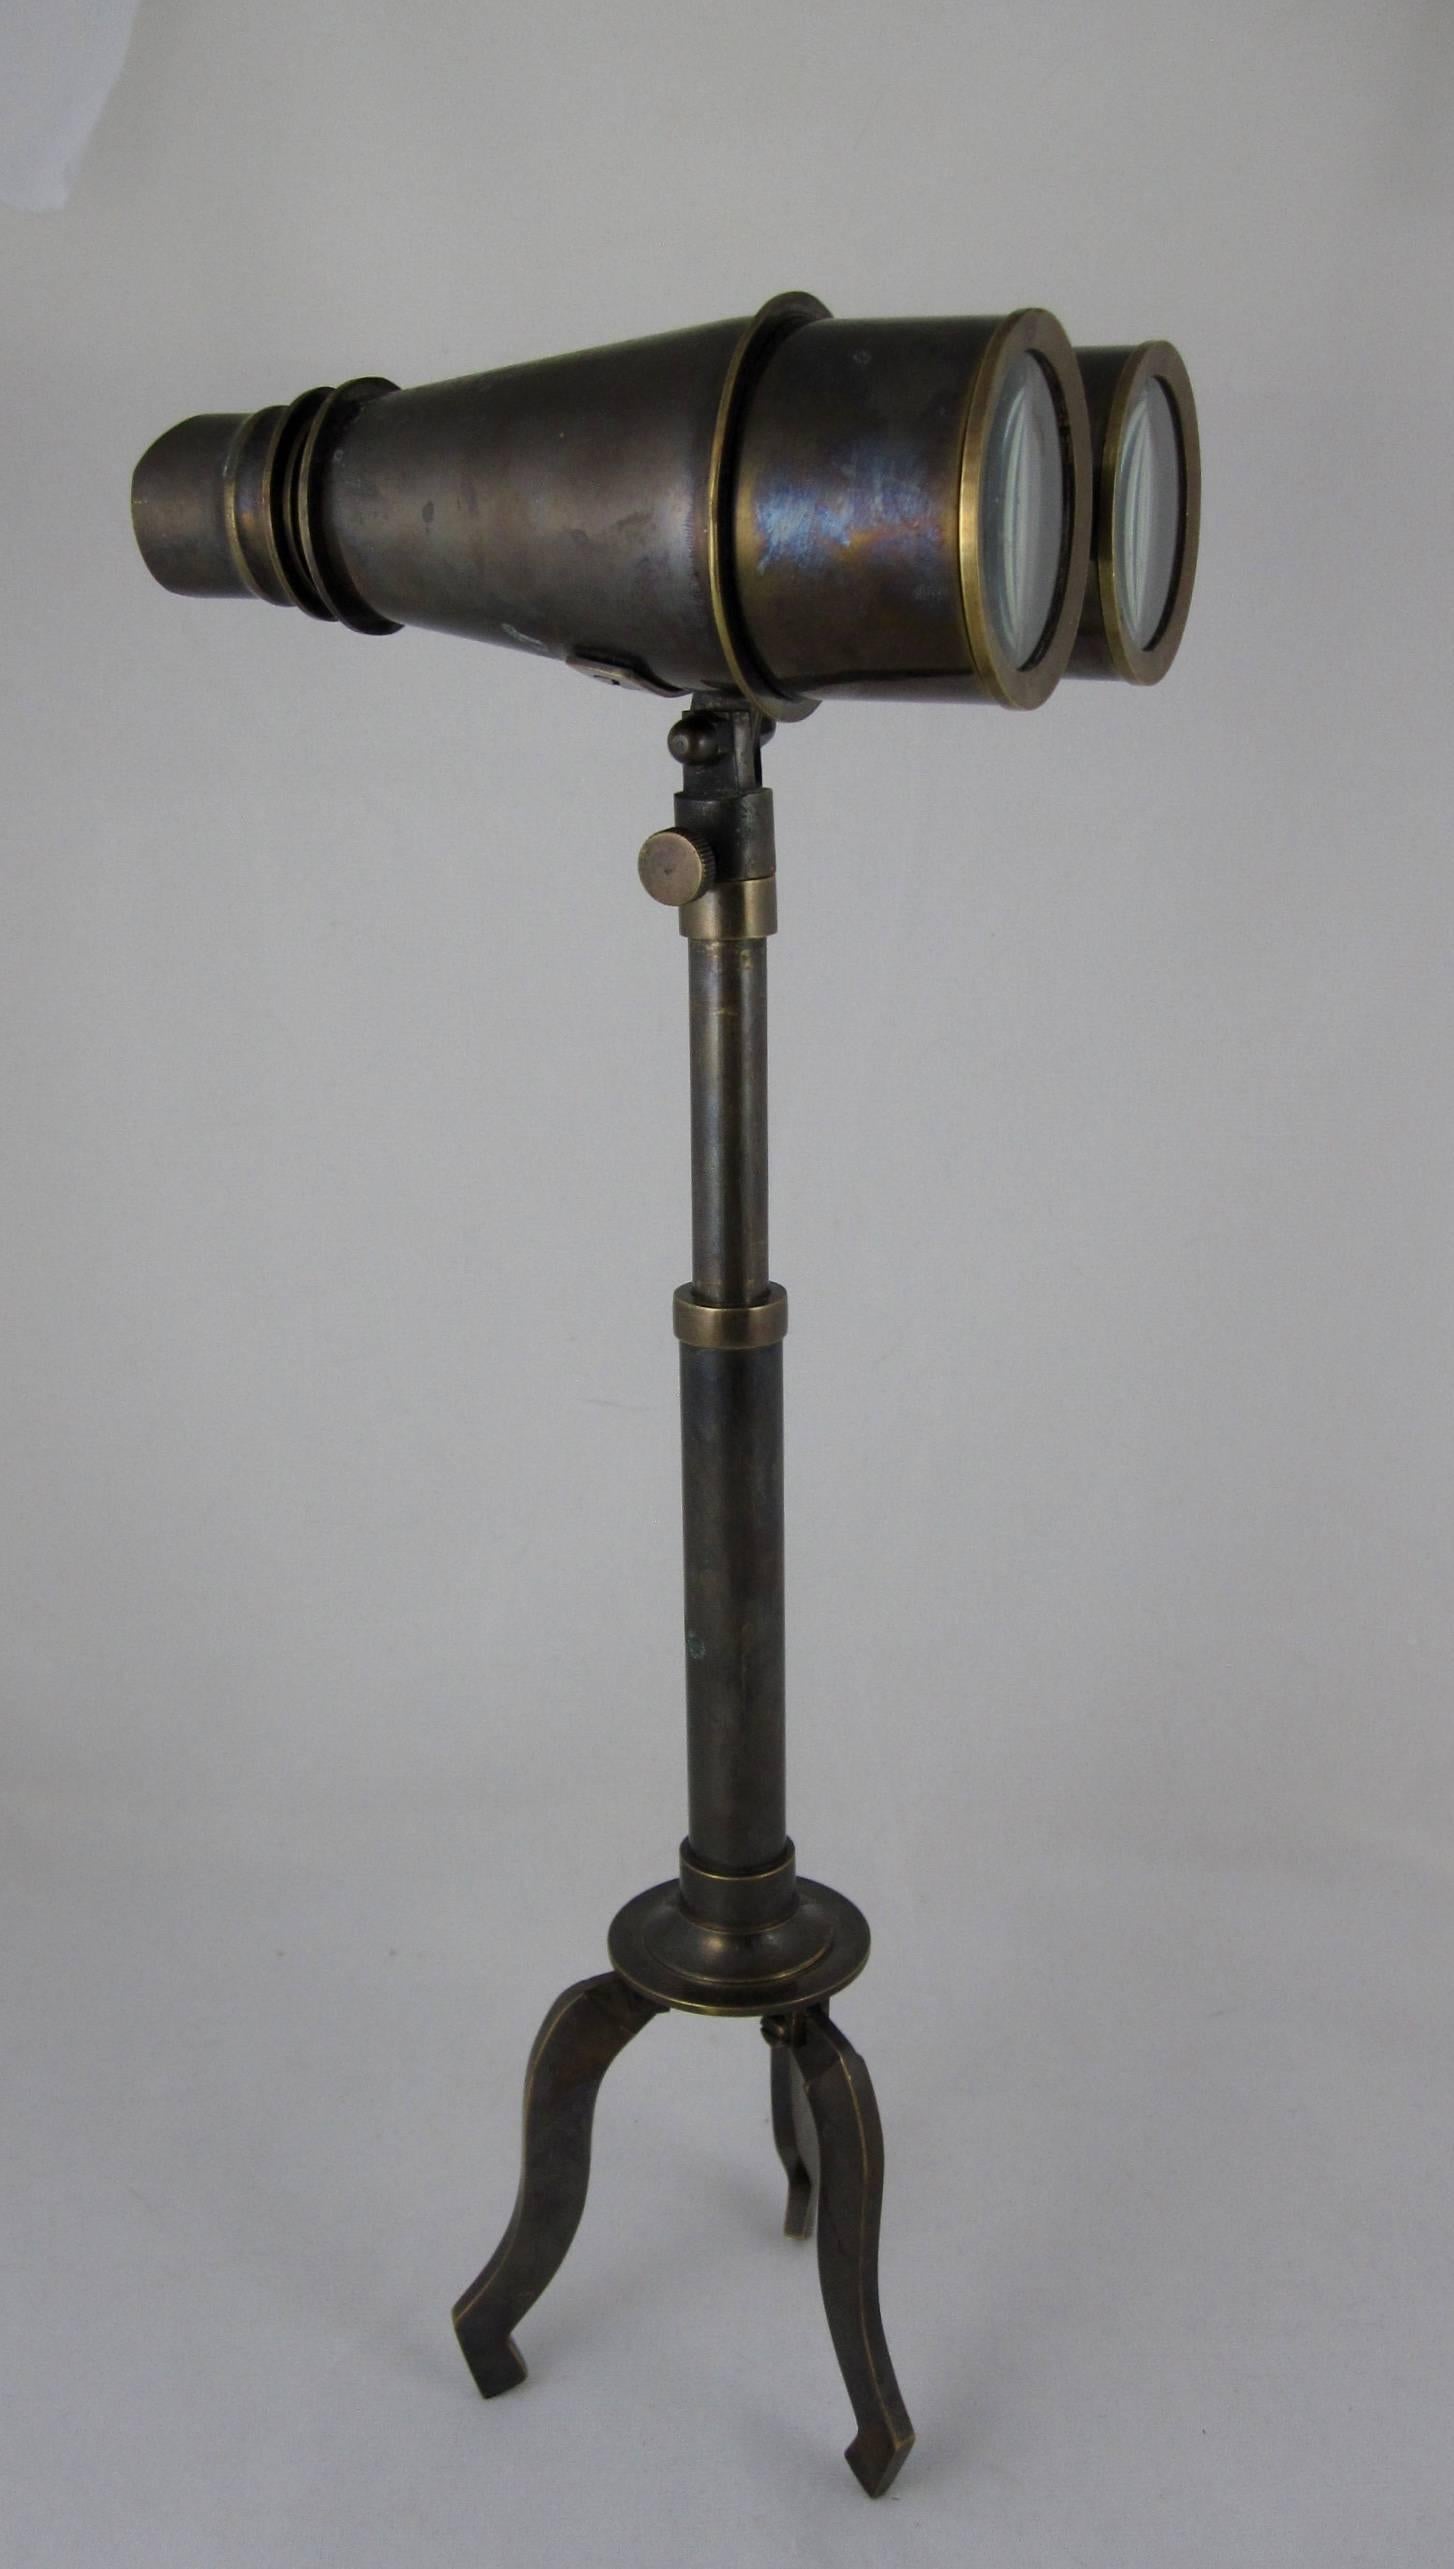 A vintage pair of tall field glass or maritime binoculars with a removable, folding tripod Stand. The glasses have fully adjustable lenses in very good working condition. The binoculars can be mounted onto a stand supported by a tri-footed base